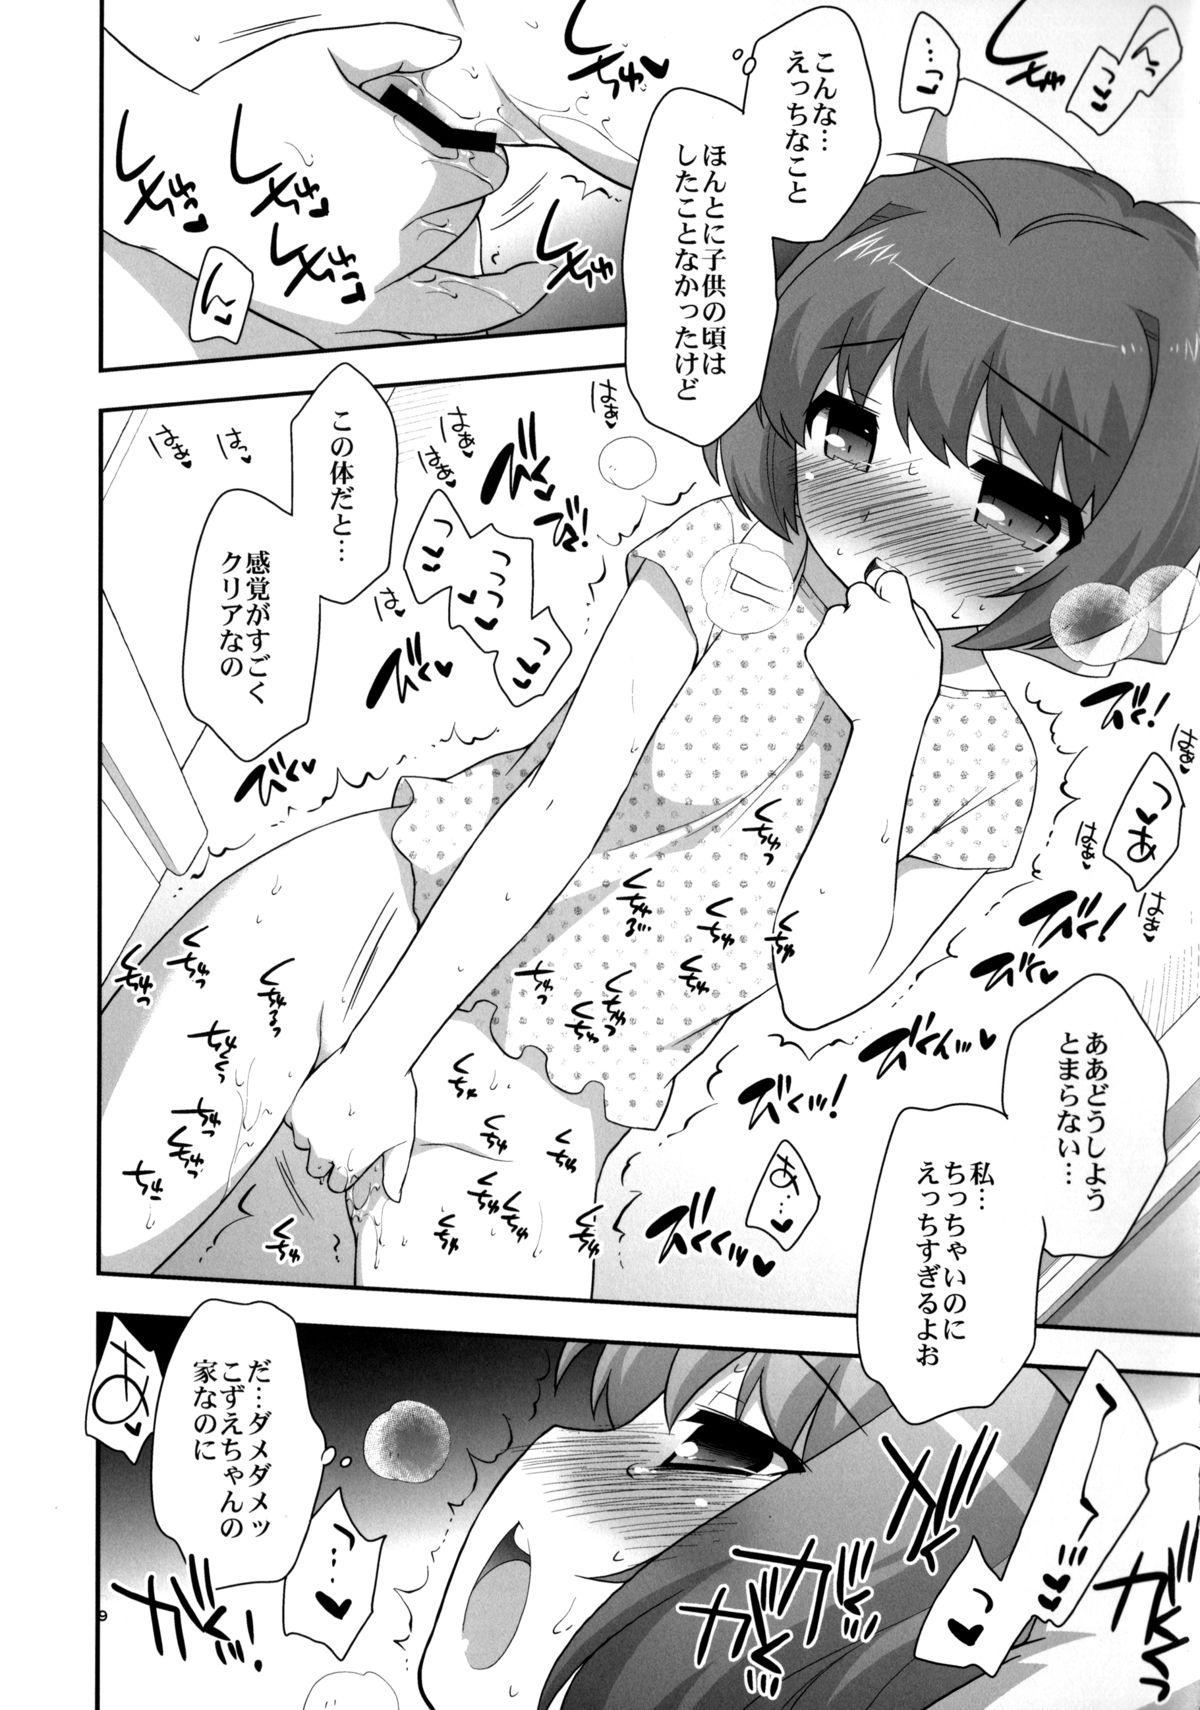 Leaked Marorara - The world god only knows Glamcore - Page 8